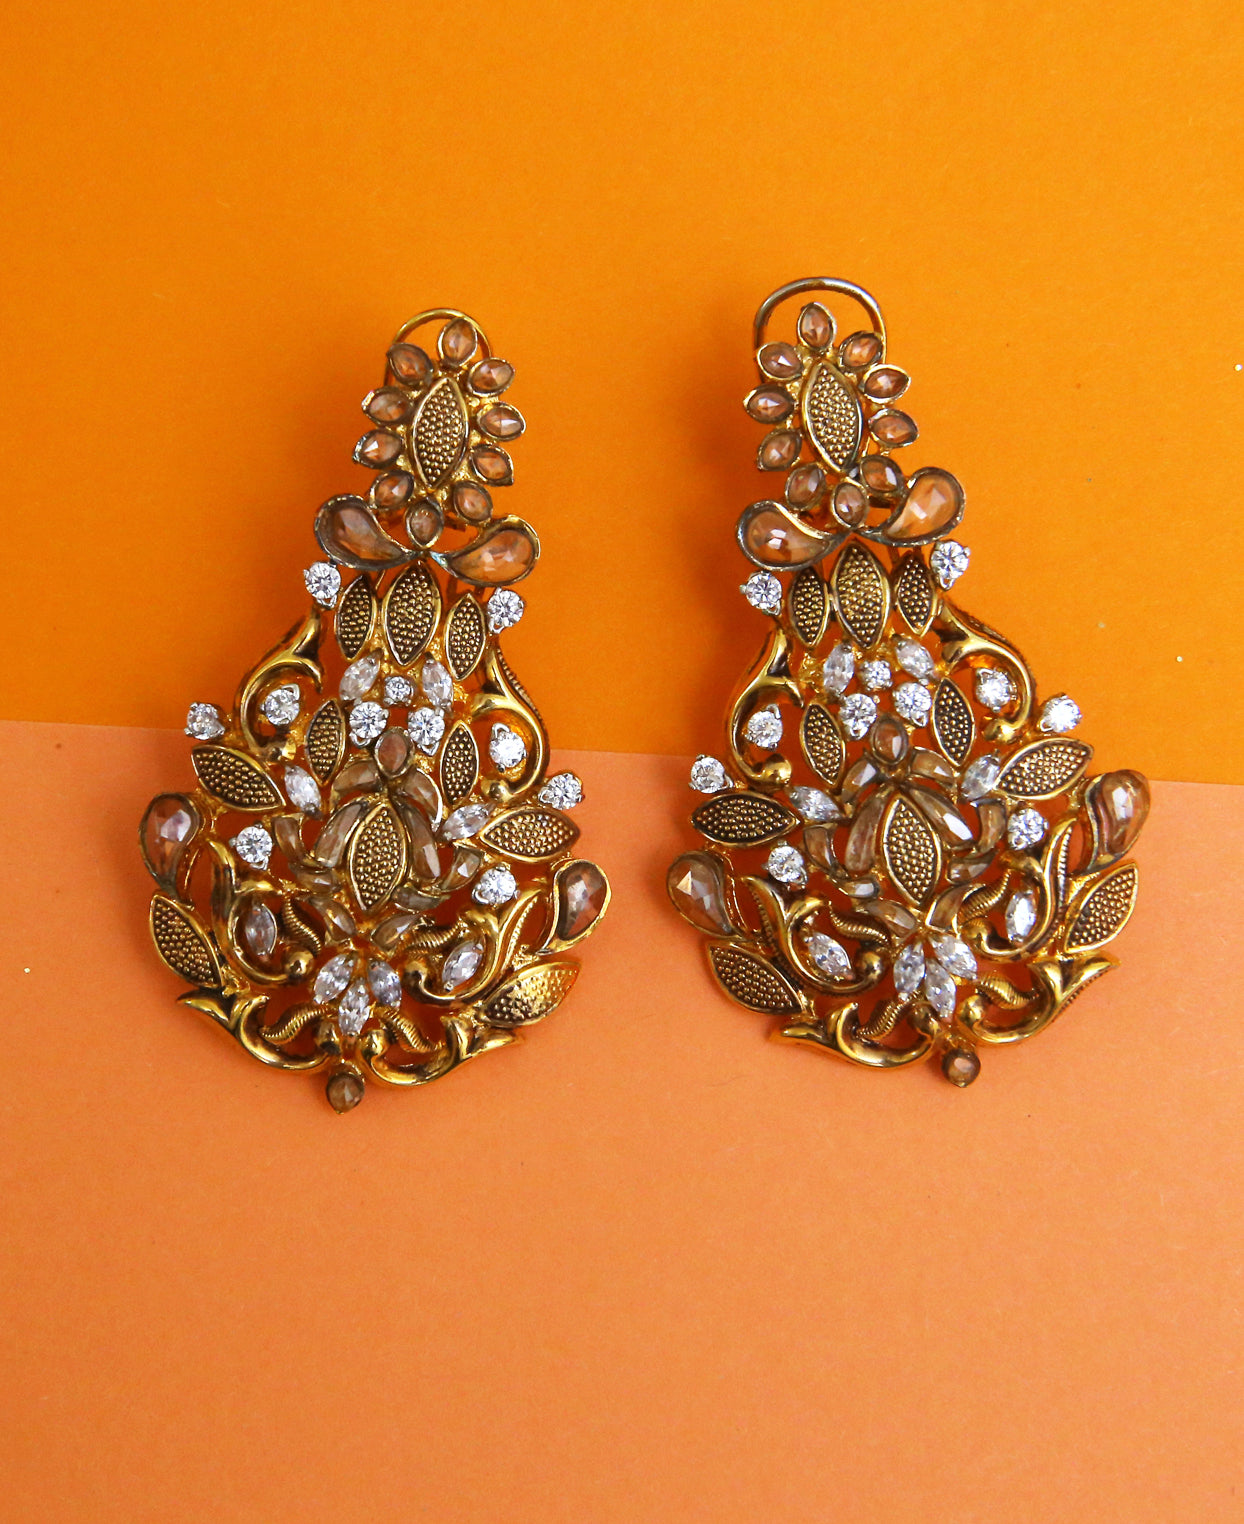 Gold and Crystal White Earrings